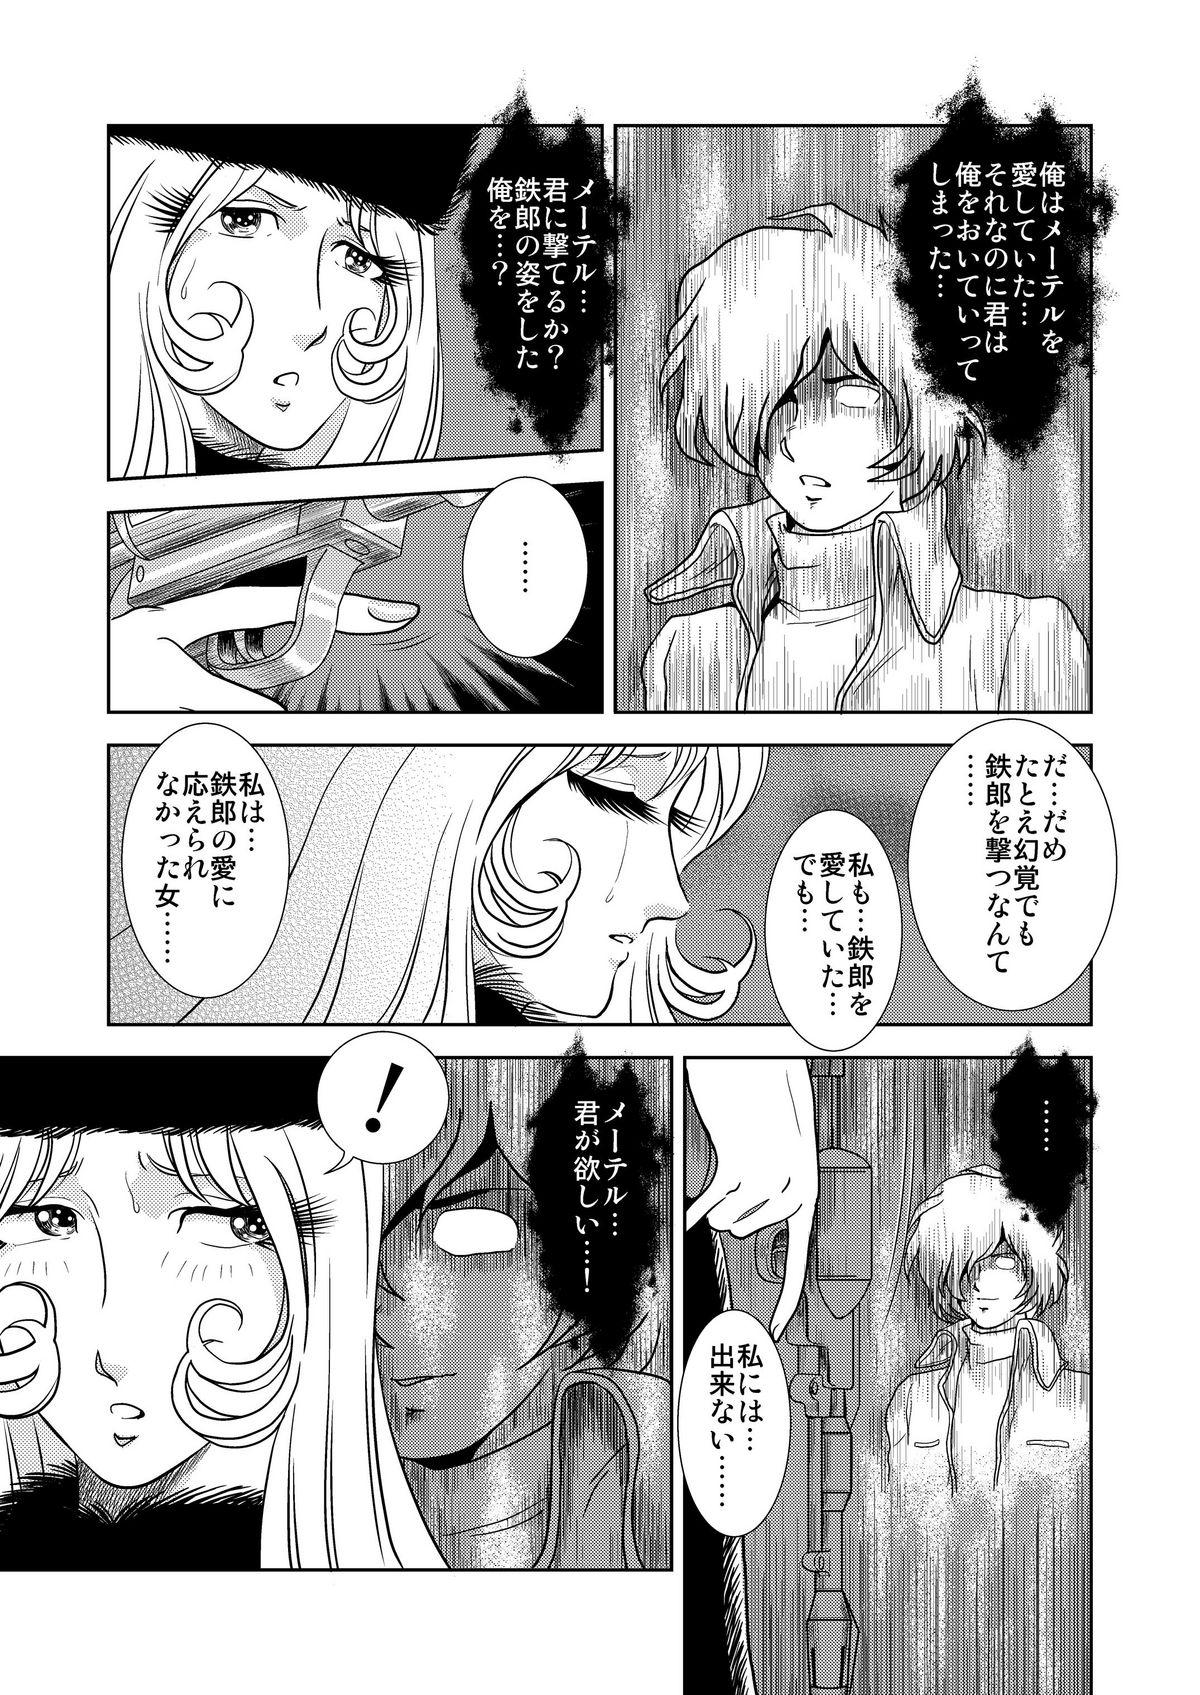 Tesao Maetel Story - Galaxy express 999 Lingerie - Page 7